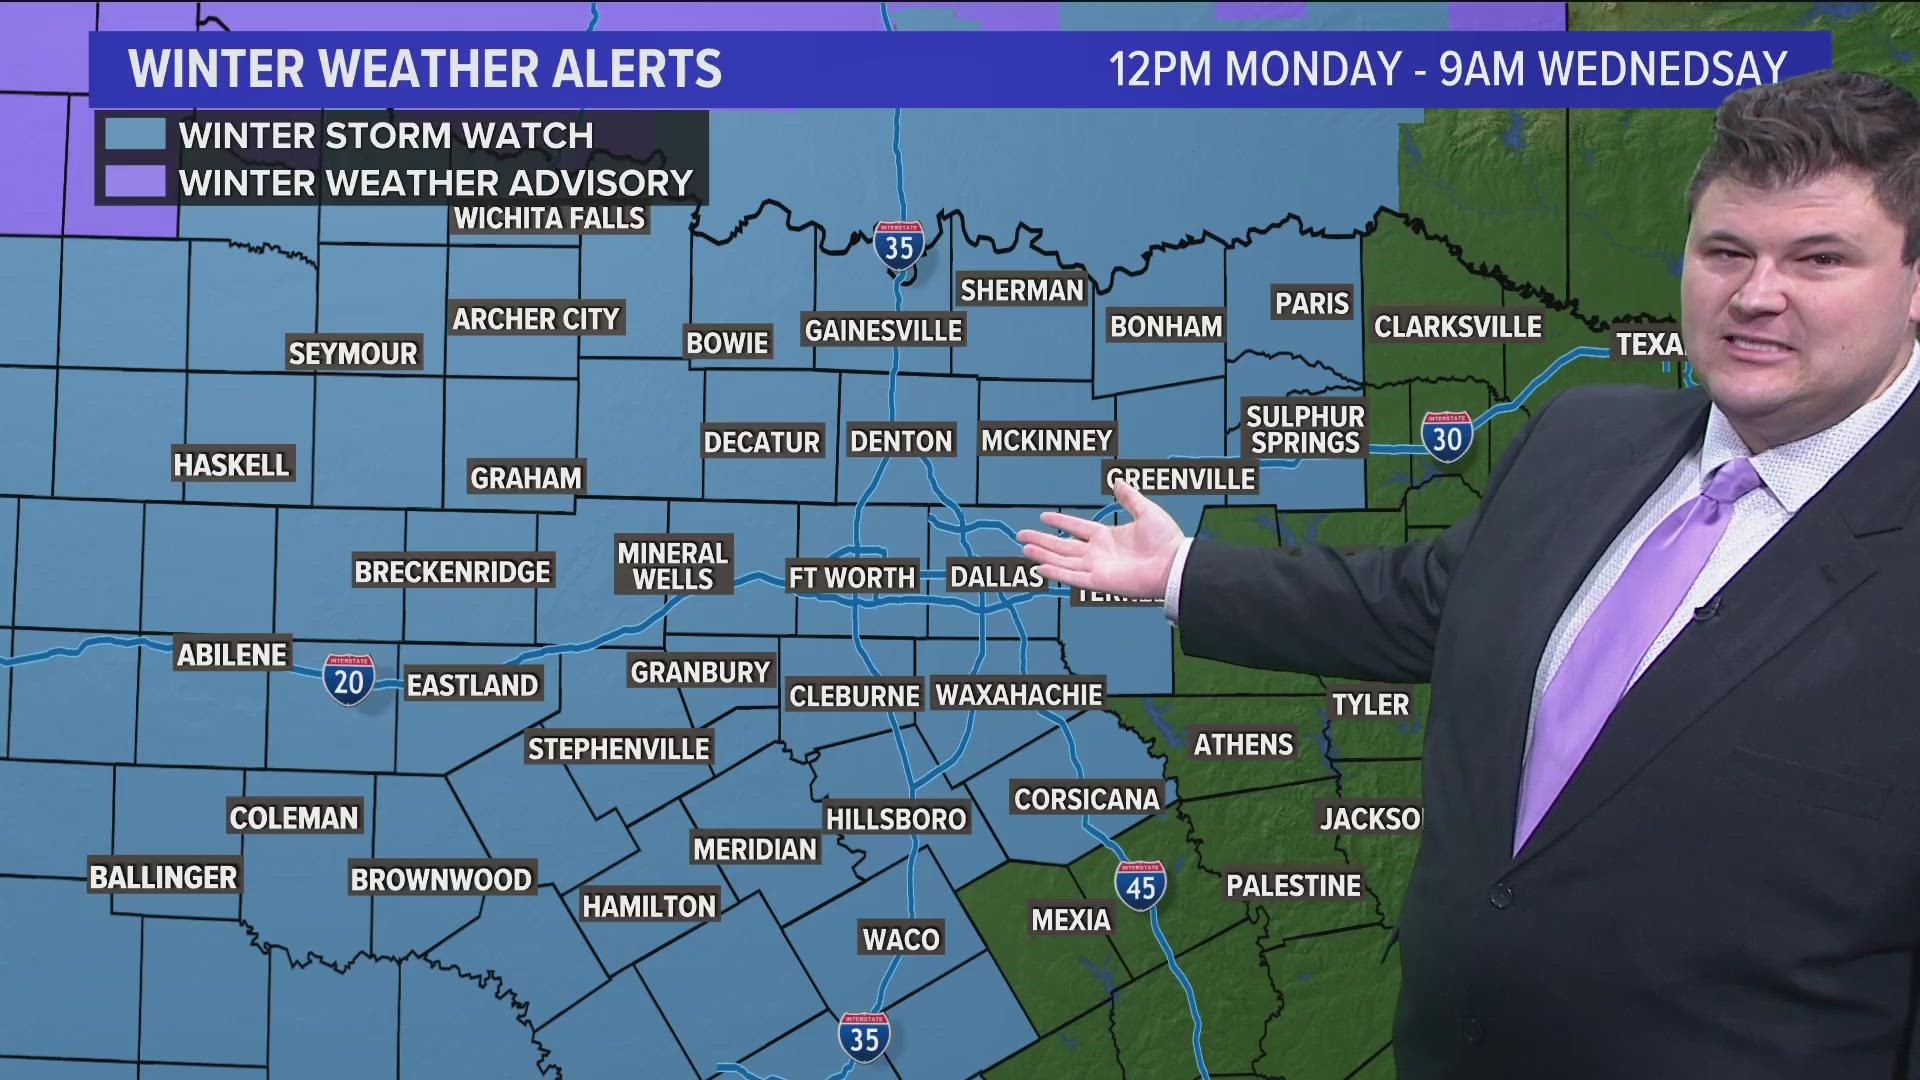 Here's what you need to know as freezing rain and icy conditions make their way to the North Texas area.